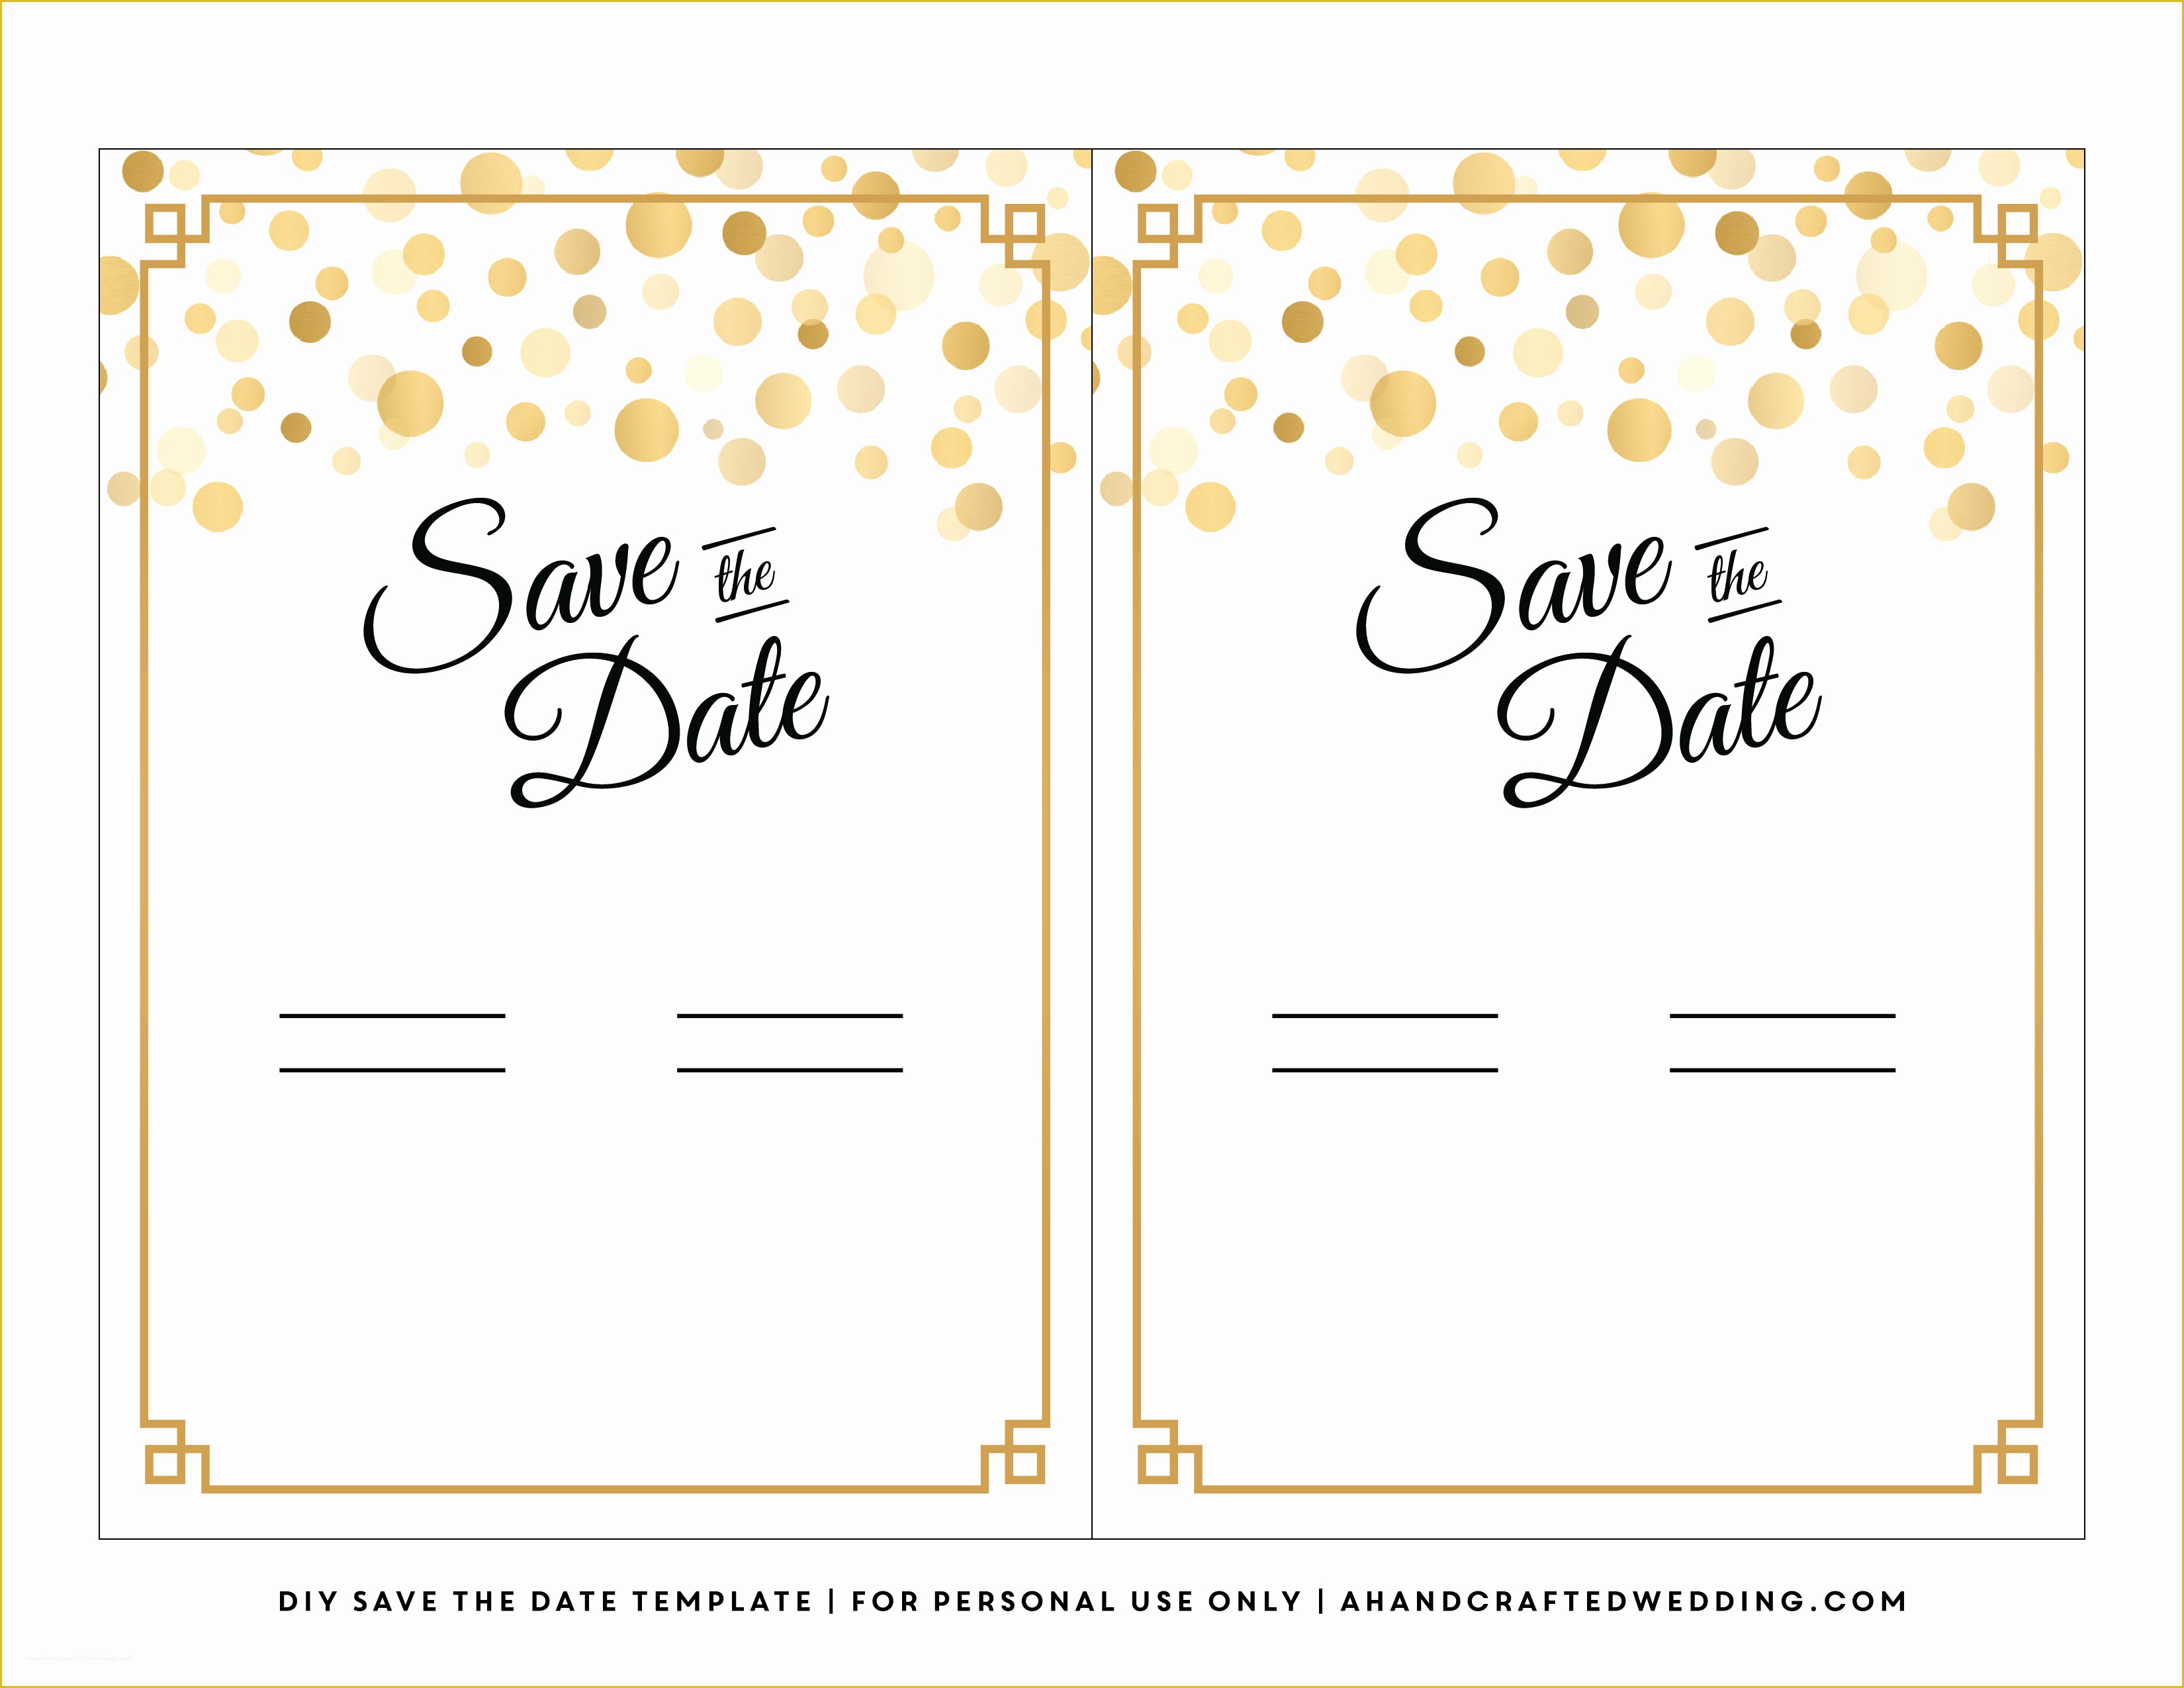 Free Printable Save the Date Invitation Templates Of 7 Best Of Diy Save the Date Template Halloween